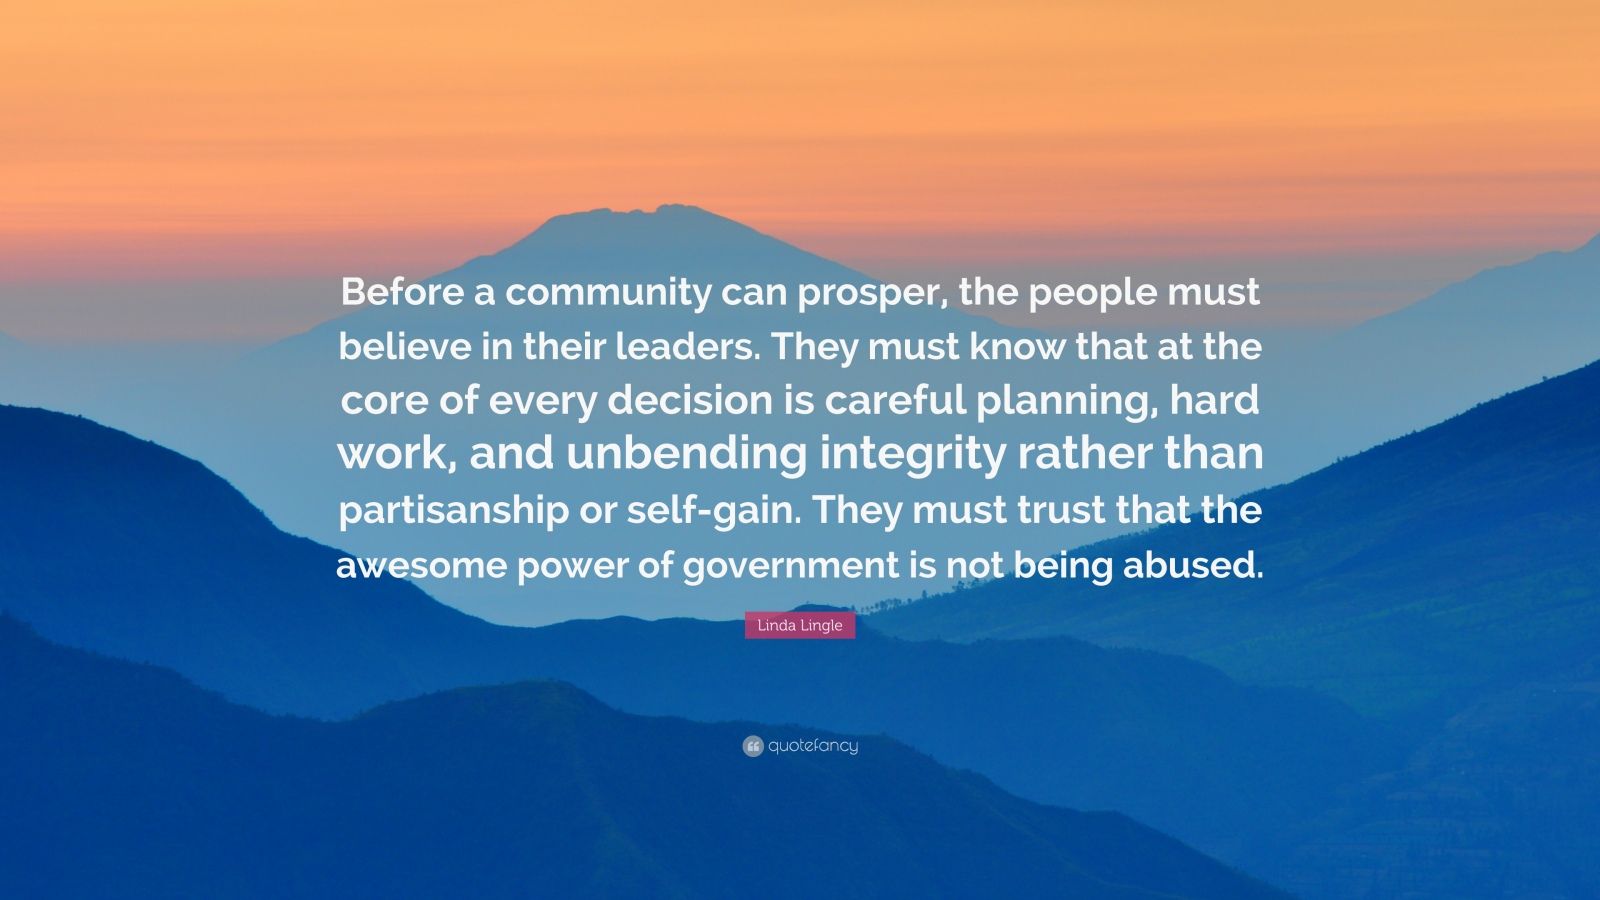 Linda Lingle Quote: "Before a community can prosper, the people must ...